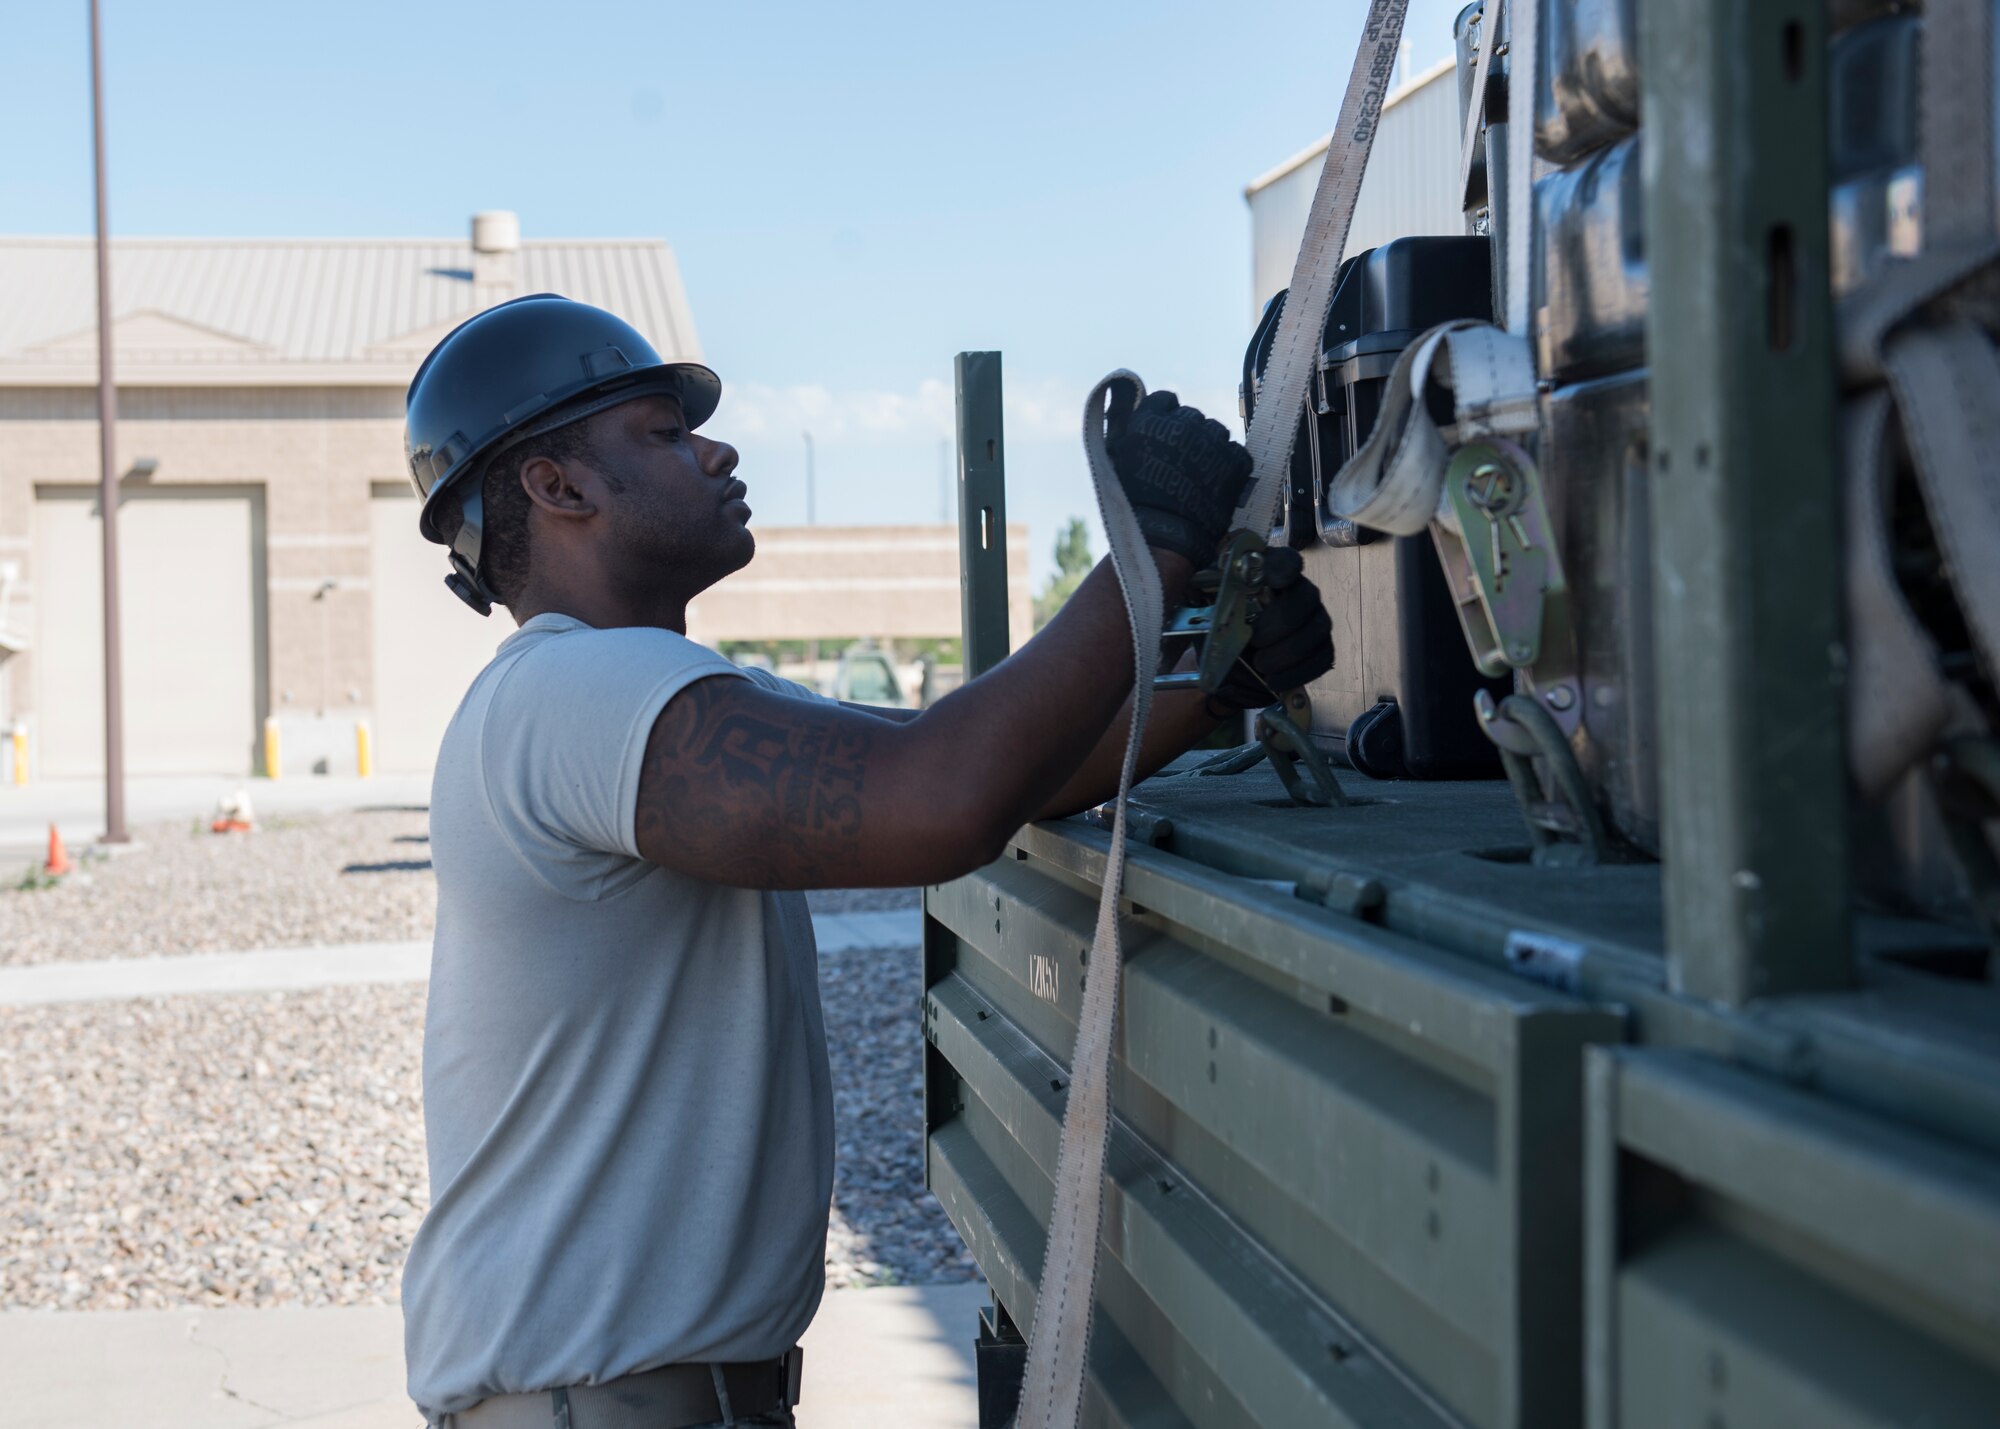 Staff Sgt. Kirt Alston, 726th Air Control Squadron, straps down supplies on a Medium Tactical Vehicle July 11, 2019, at Mountain Home Air Force Base, Idaho. The 726th ACS conducts inspections throughout the packing process to ensure mission supplies are properly loaded onto vehicles. (U.S. Air Force photo by Senior Airman Tyrell Hall)